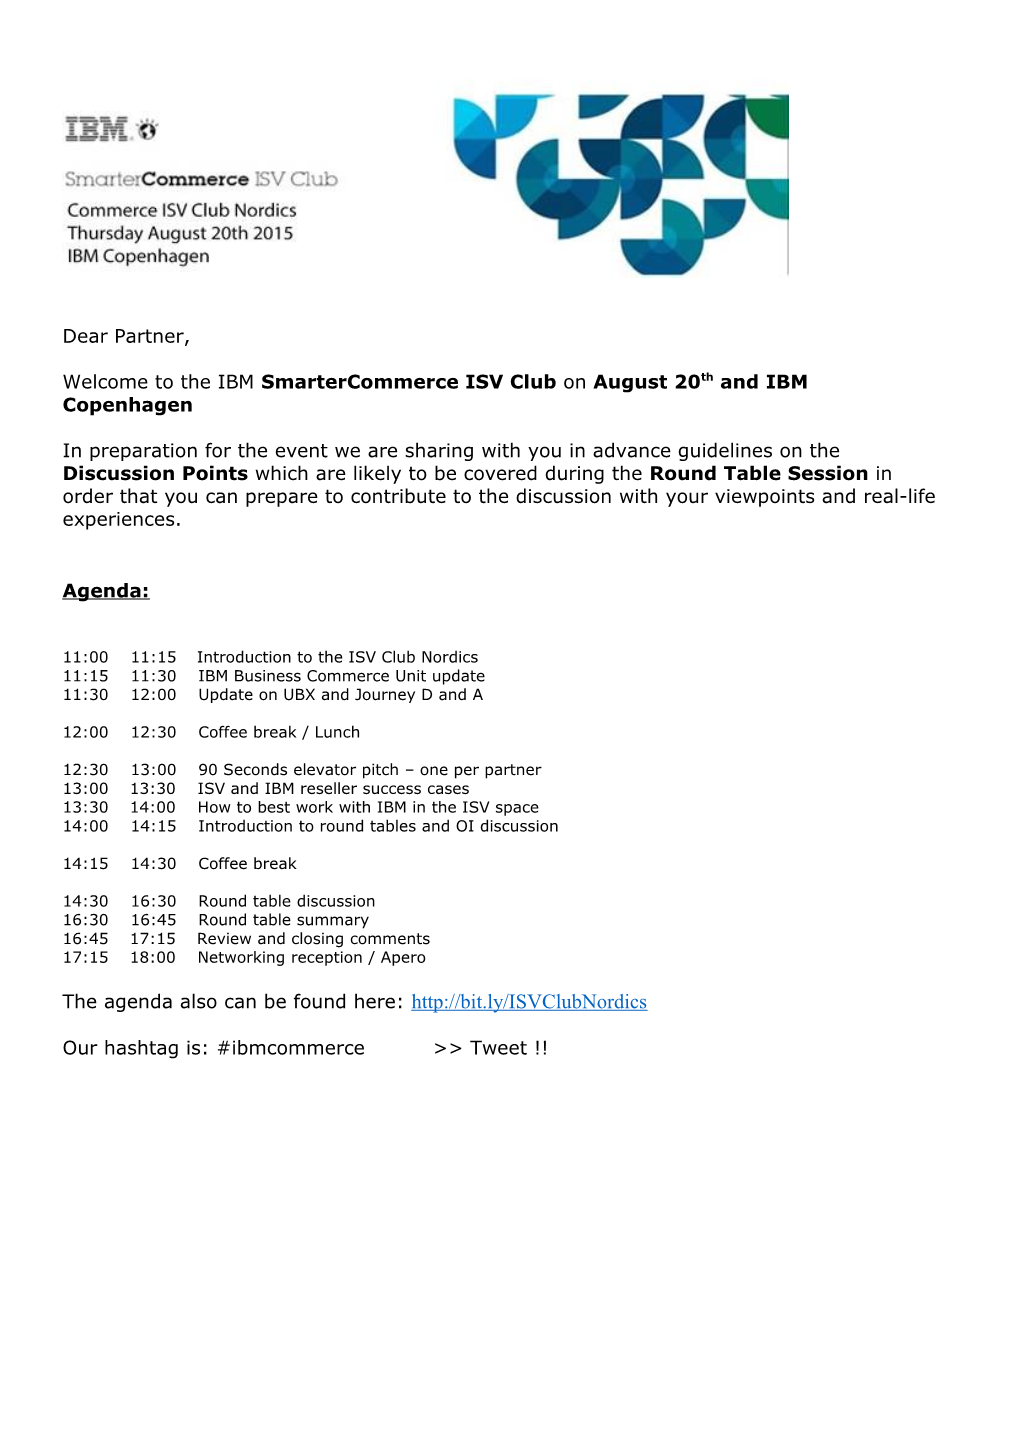 Welcome to the IBM Smartercommerce ISV Club on August 20Th and IBM Copenhagen